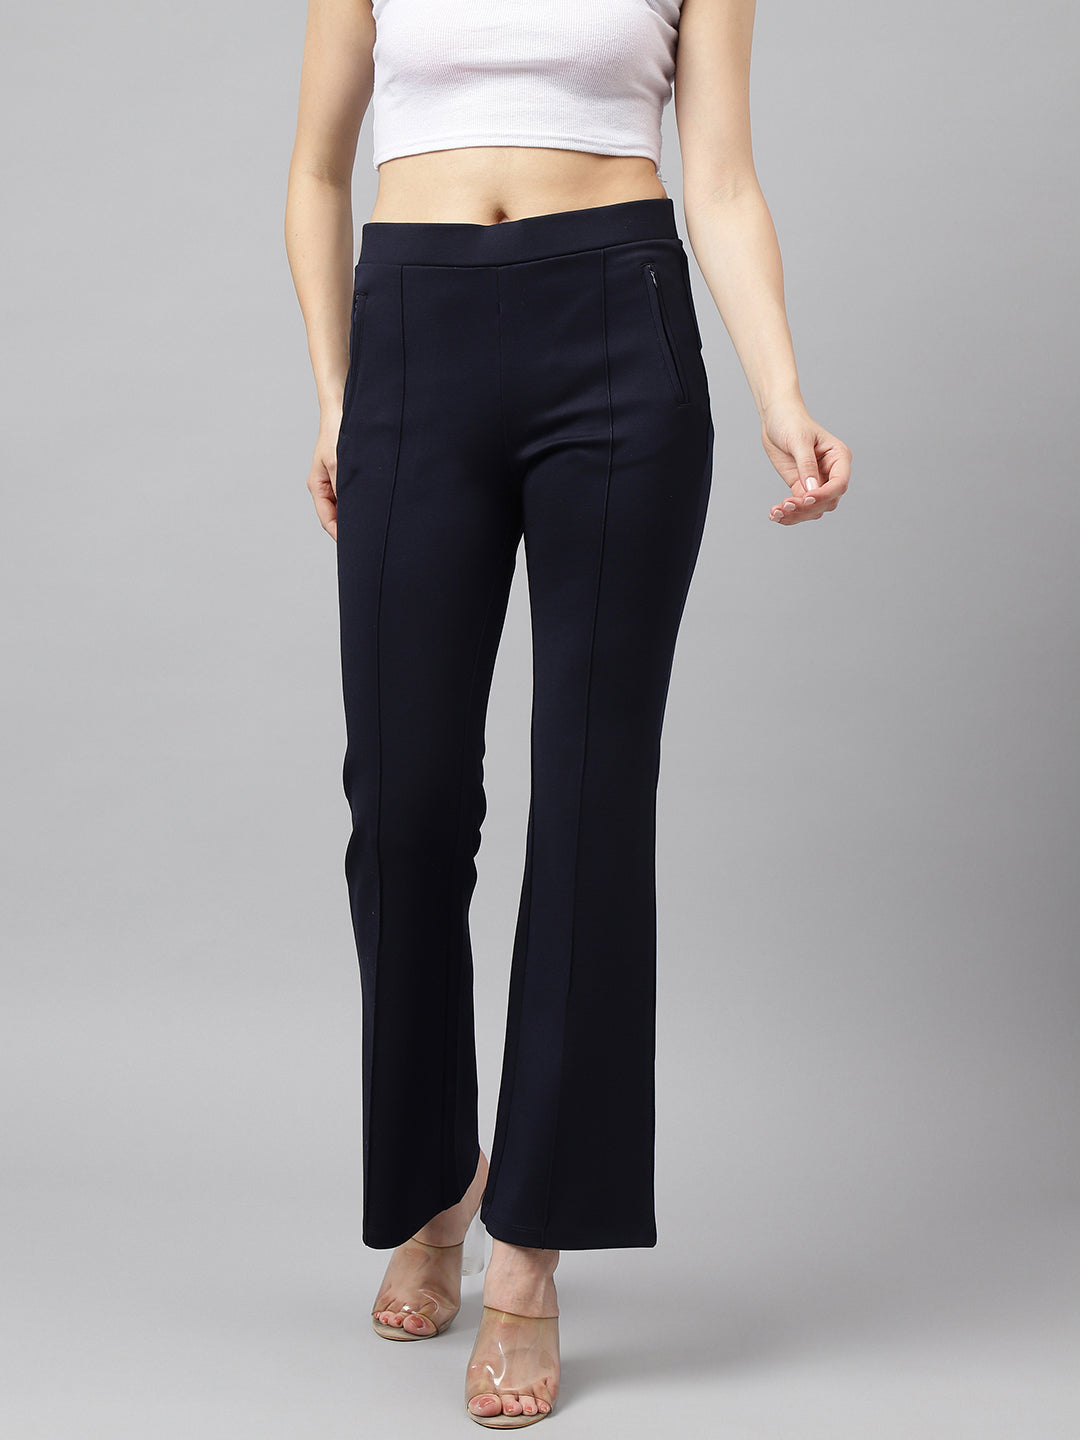 Blue Navy Solid High-Rise Trousers/Pant For Casual Wear